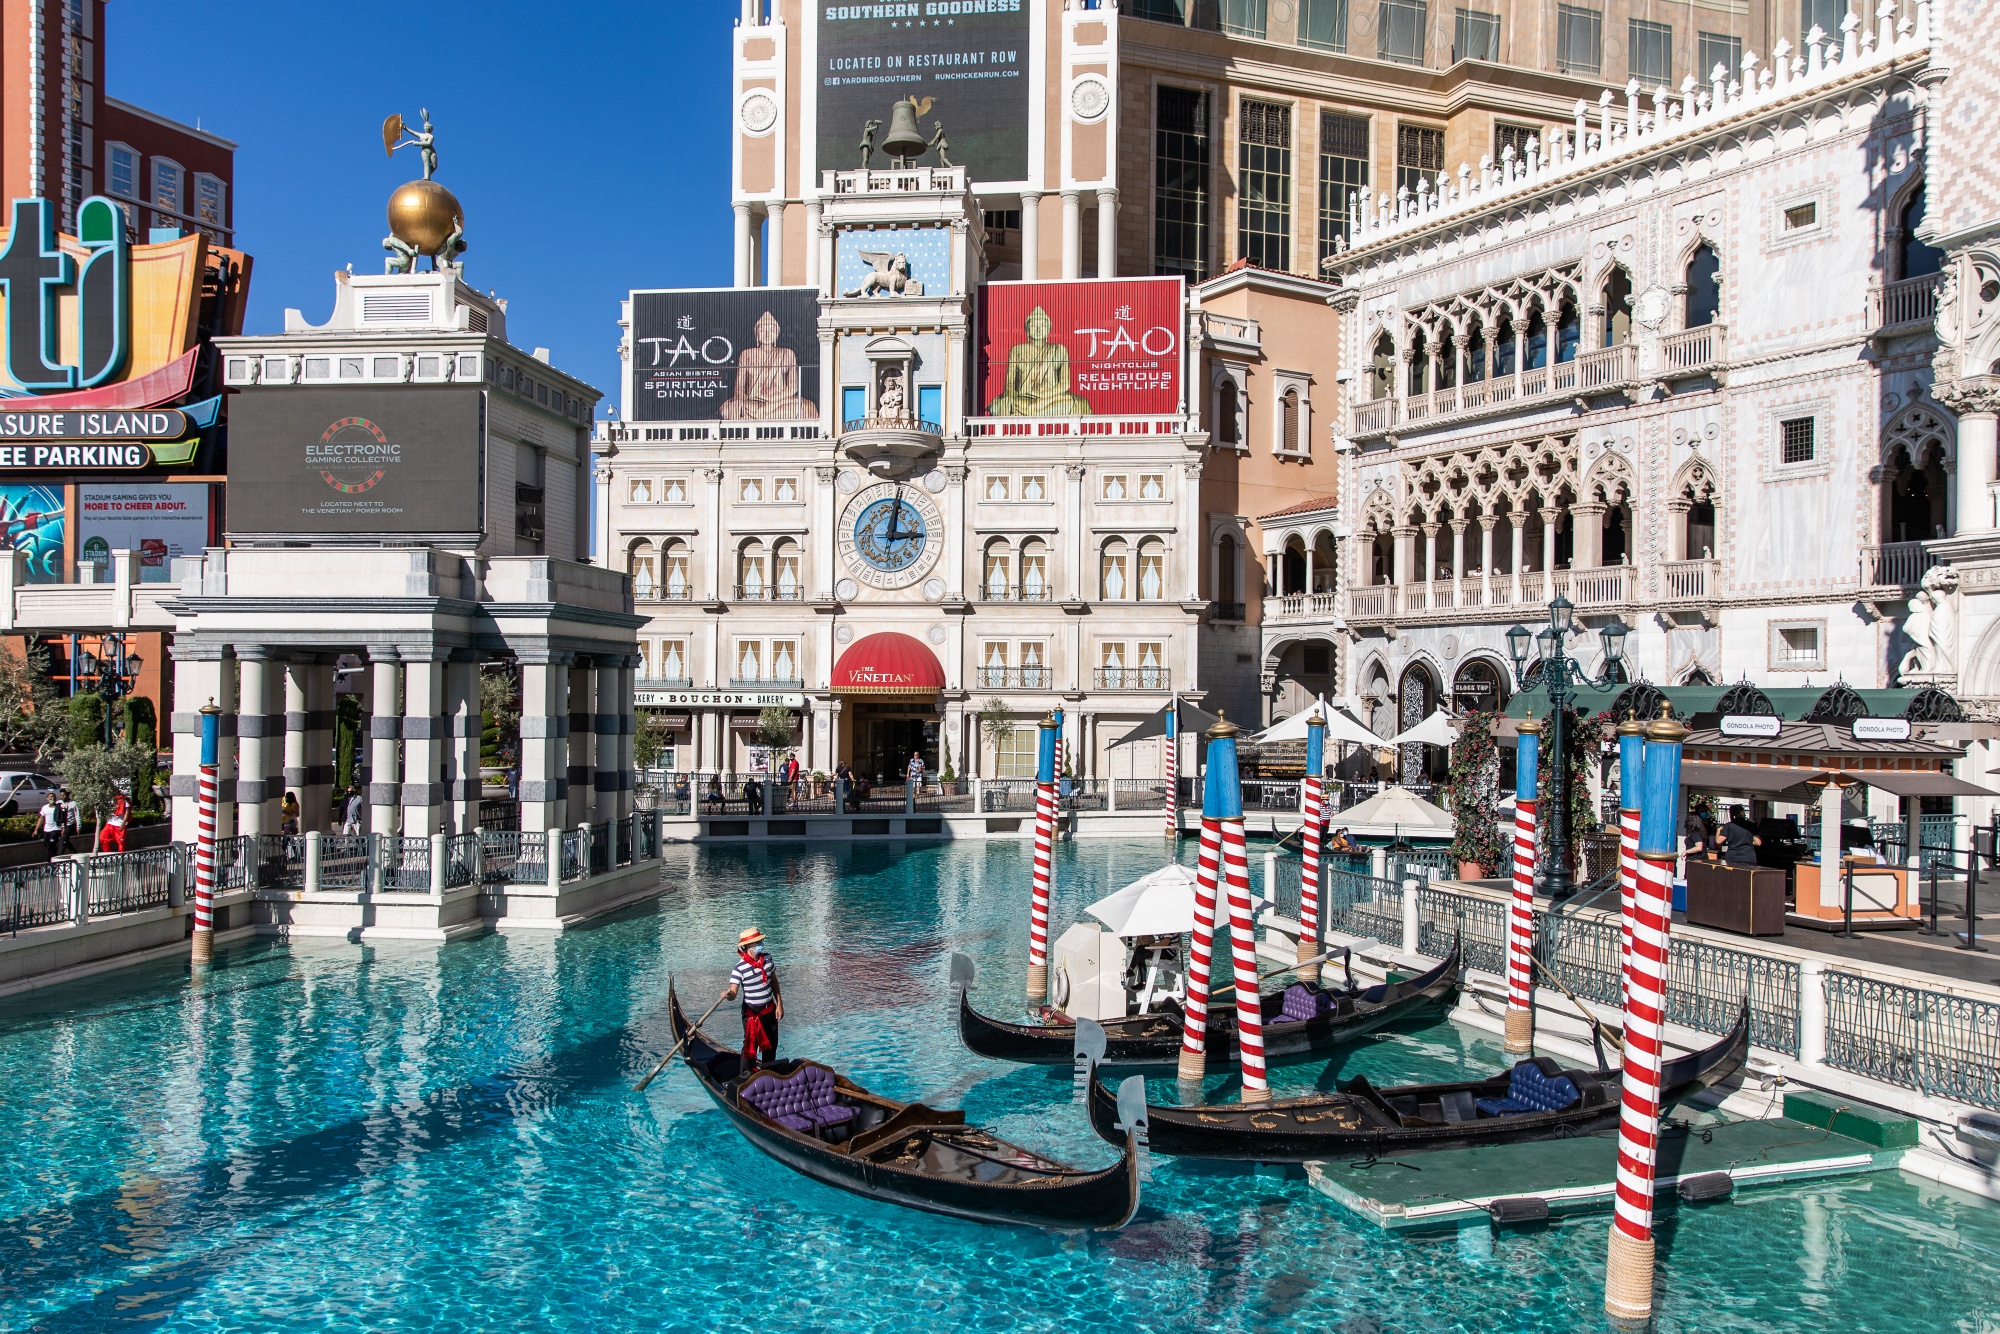 MGM Growth Properties Interested in Buying the Venetian Casino - Bloomberg